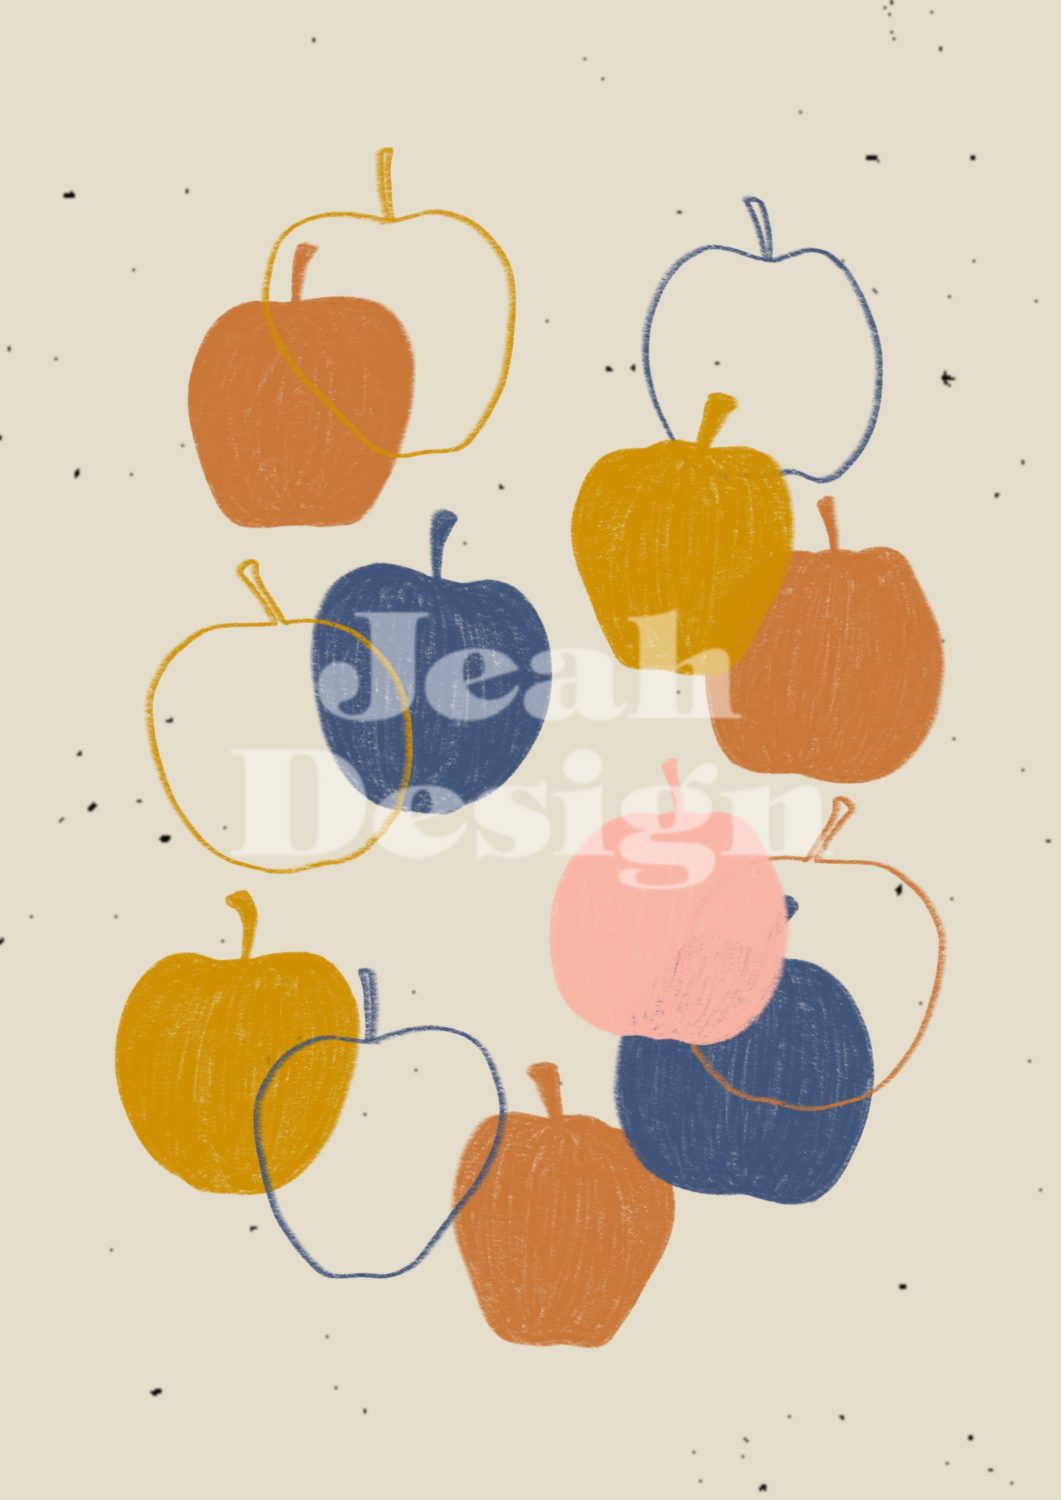 Art print with apple illustrations one it.